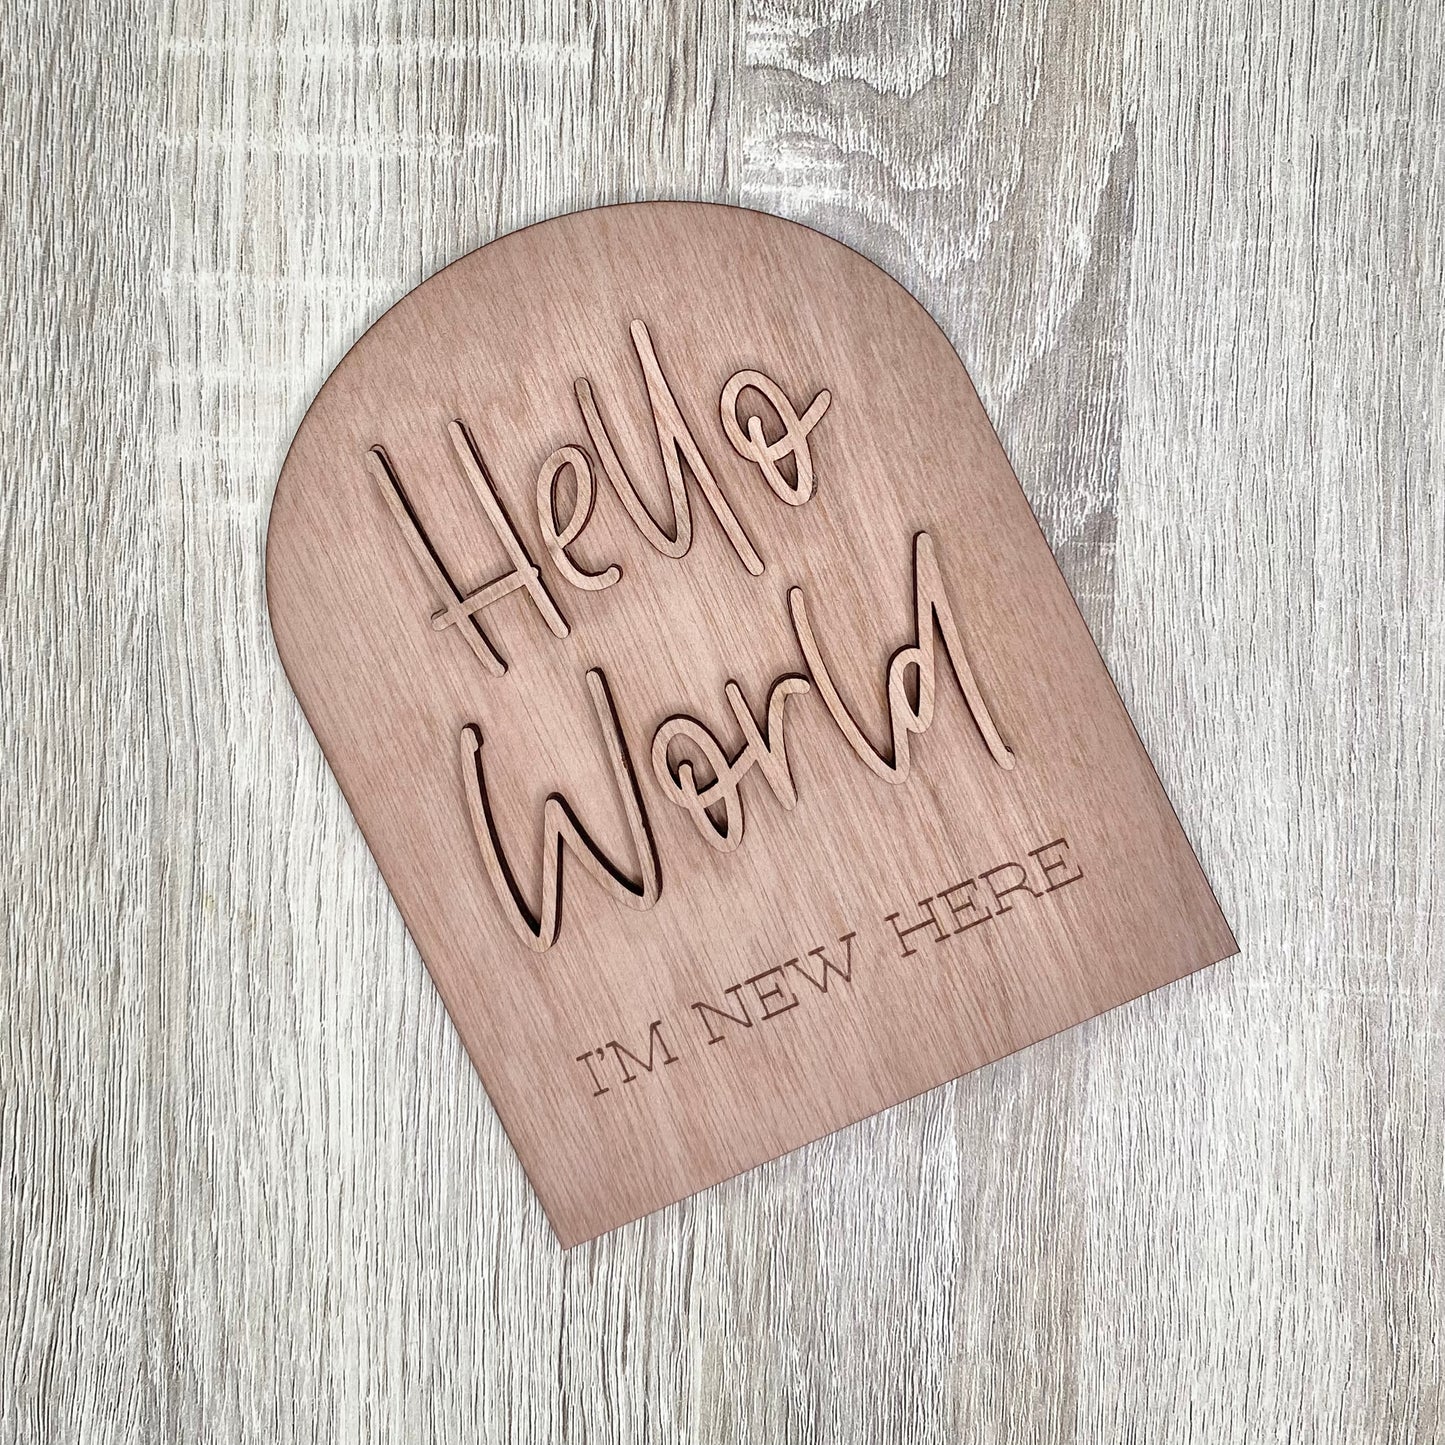 Hello world plaque with wooden accent